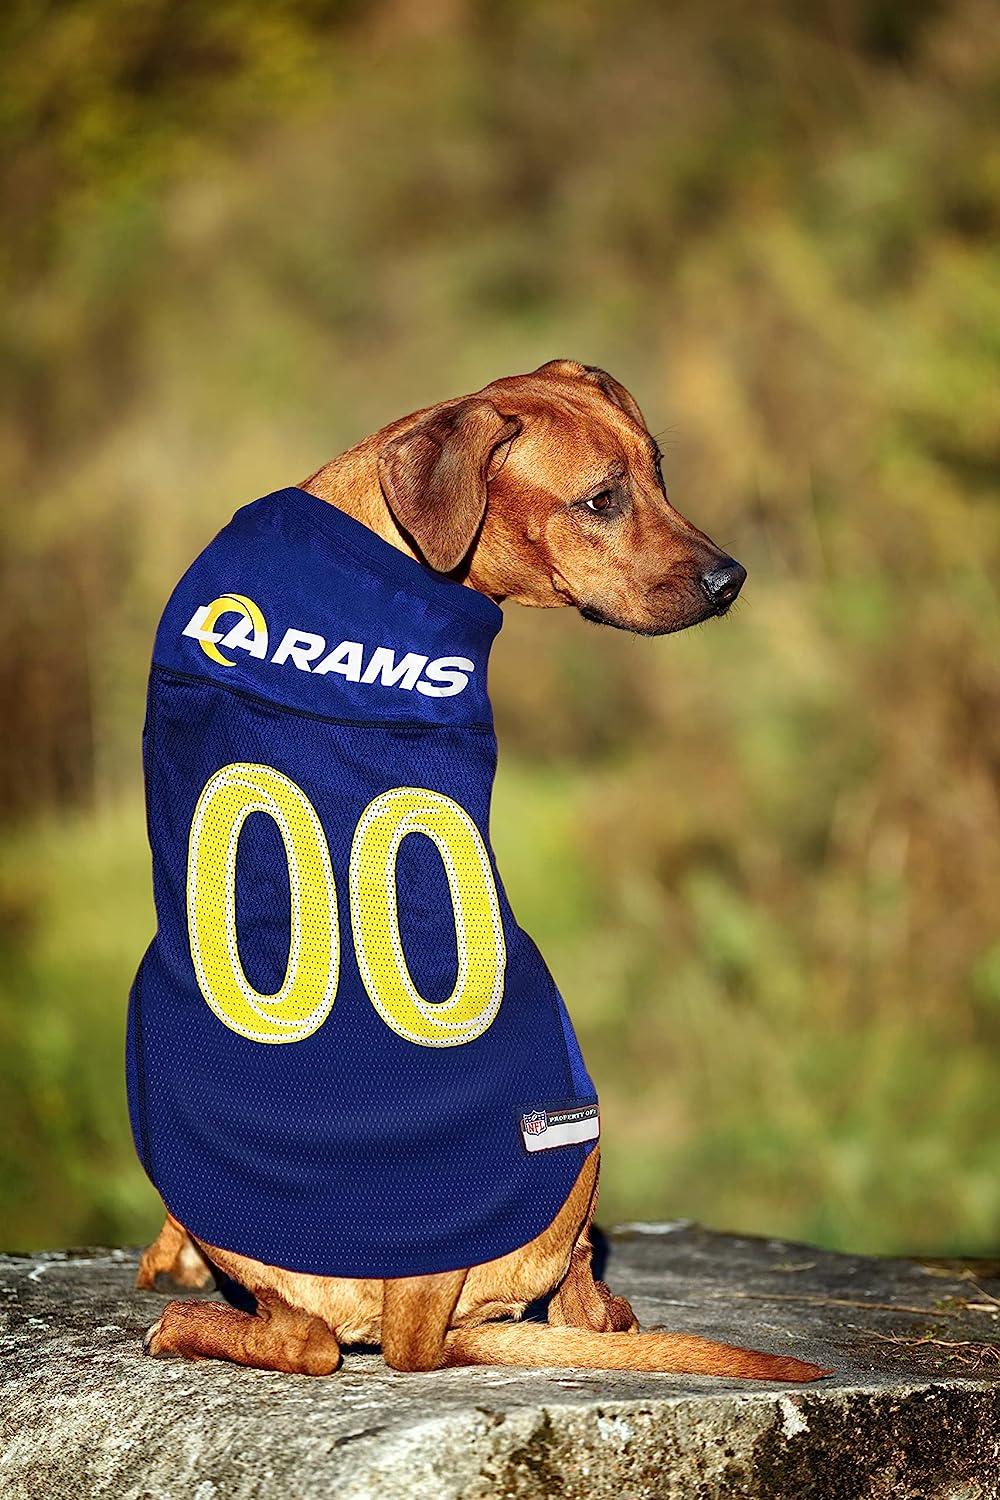 nfl jersey for dogs